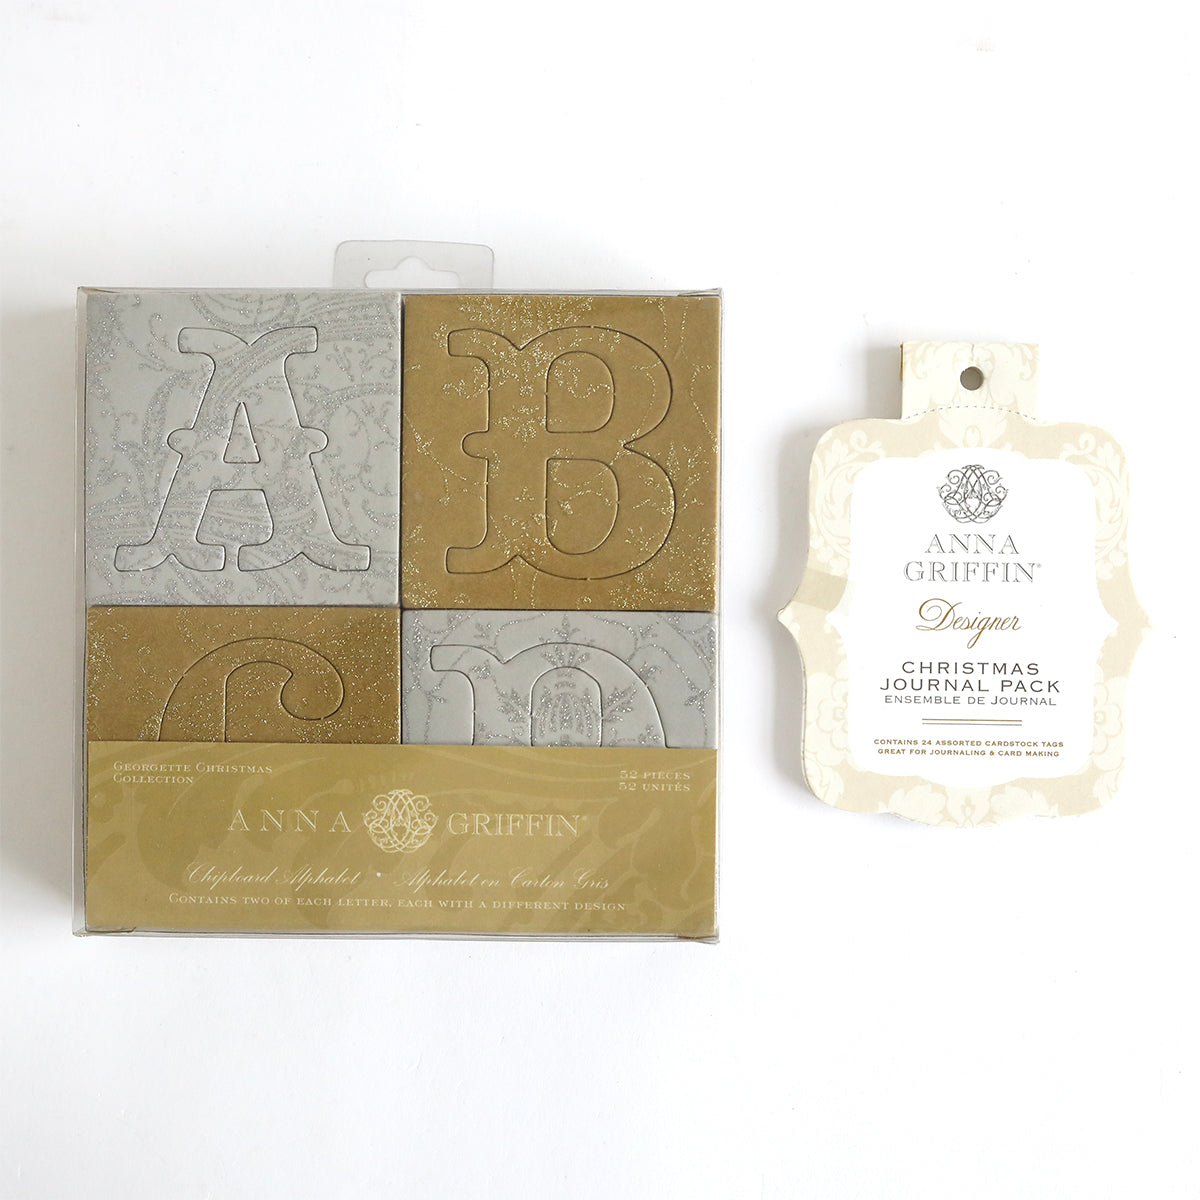 A Georgette Holiday Chipboard Letters and Journaling Tags containing Alphabet Chipboard Letters for journaling, neatly organized in a box with a tag.